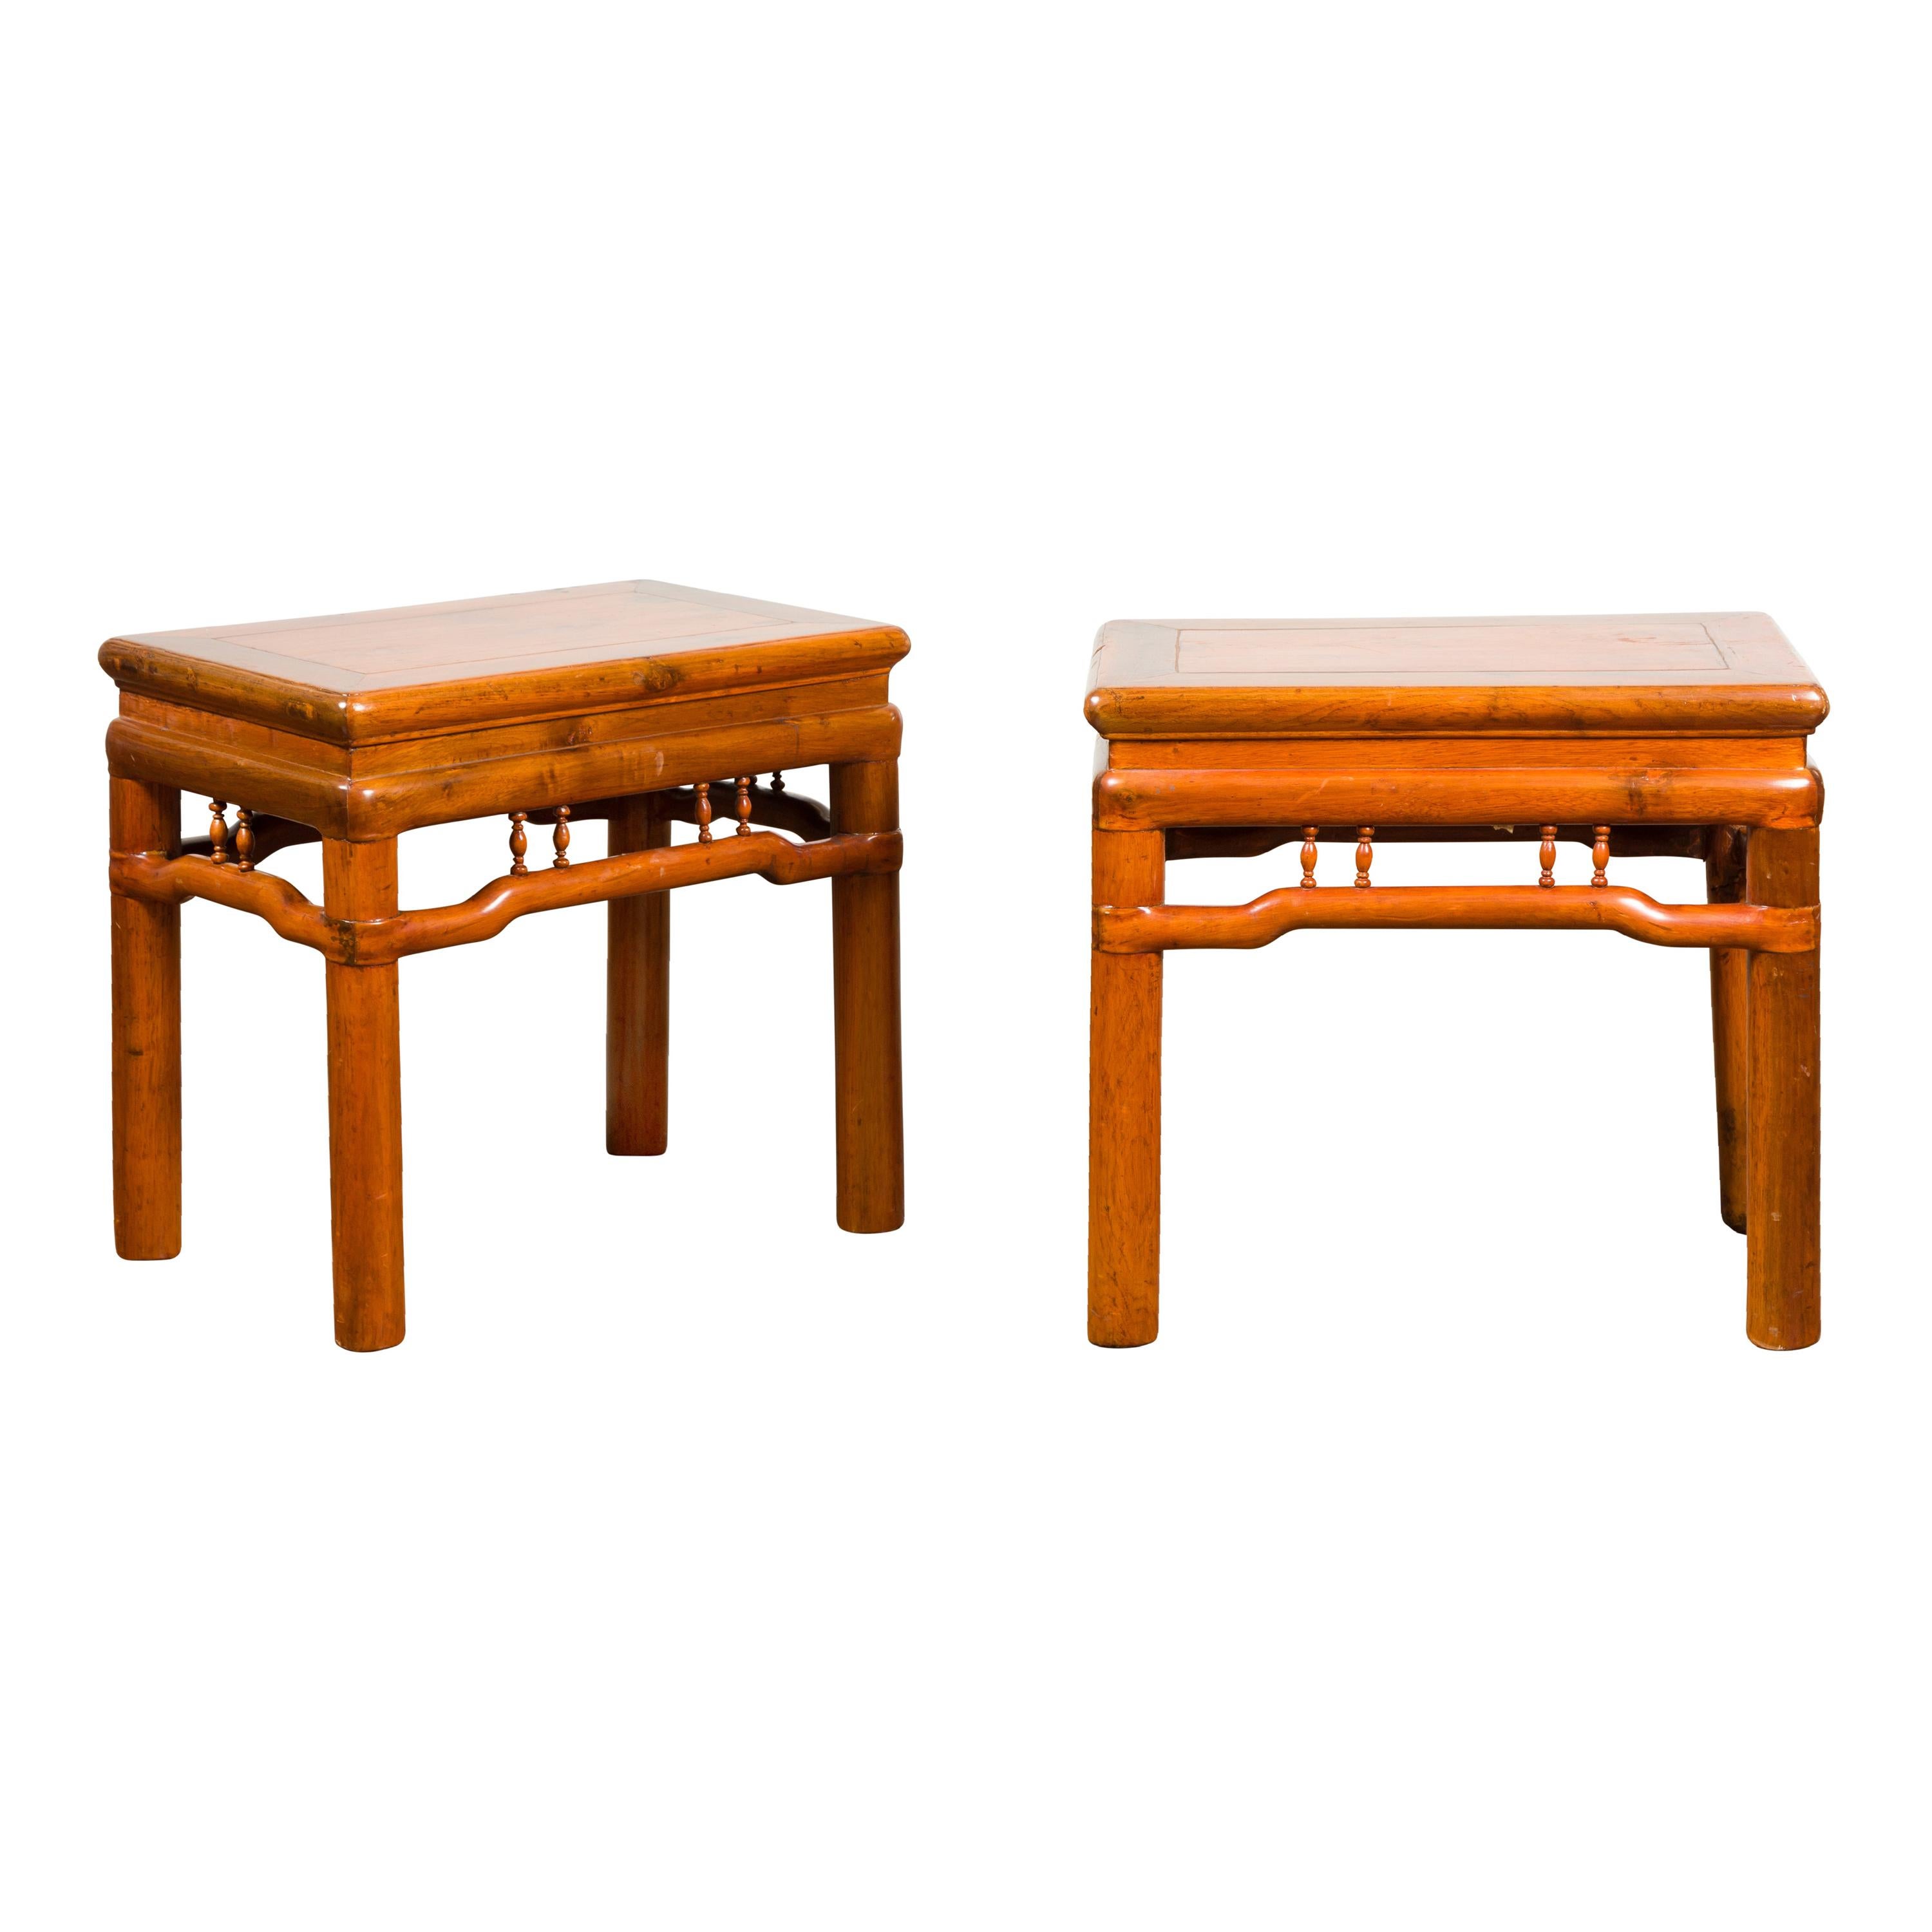 Pair of Chinese Qing Dynasty 19th Century Side Tables with Humpback Stretchers For Sale